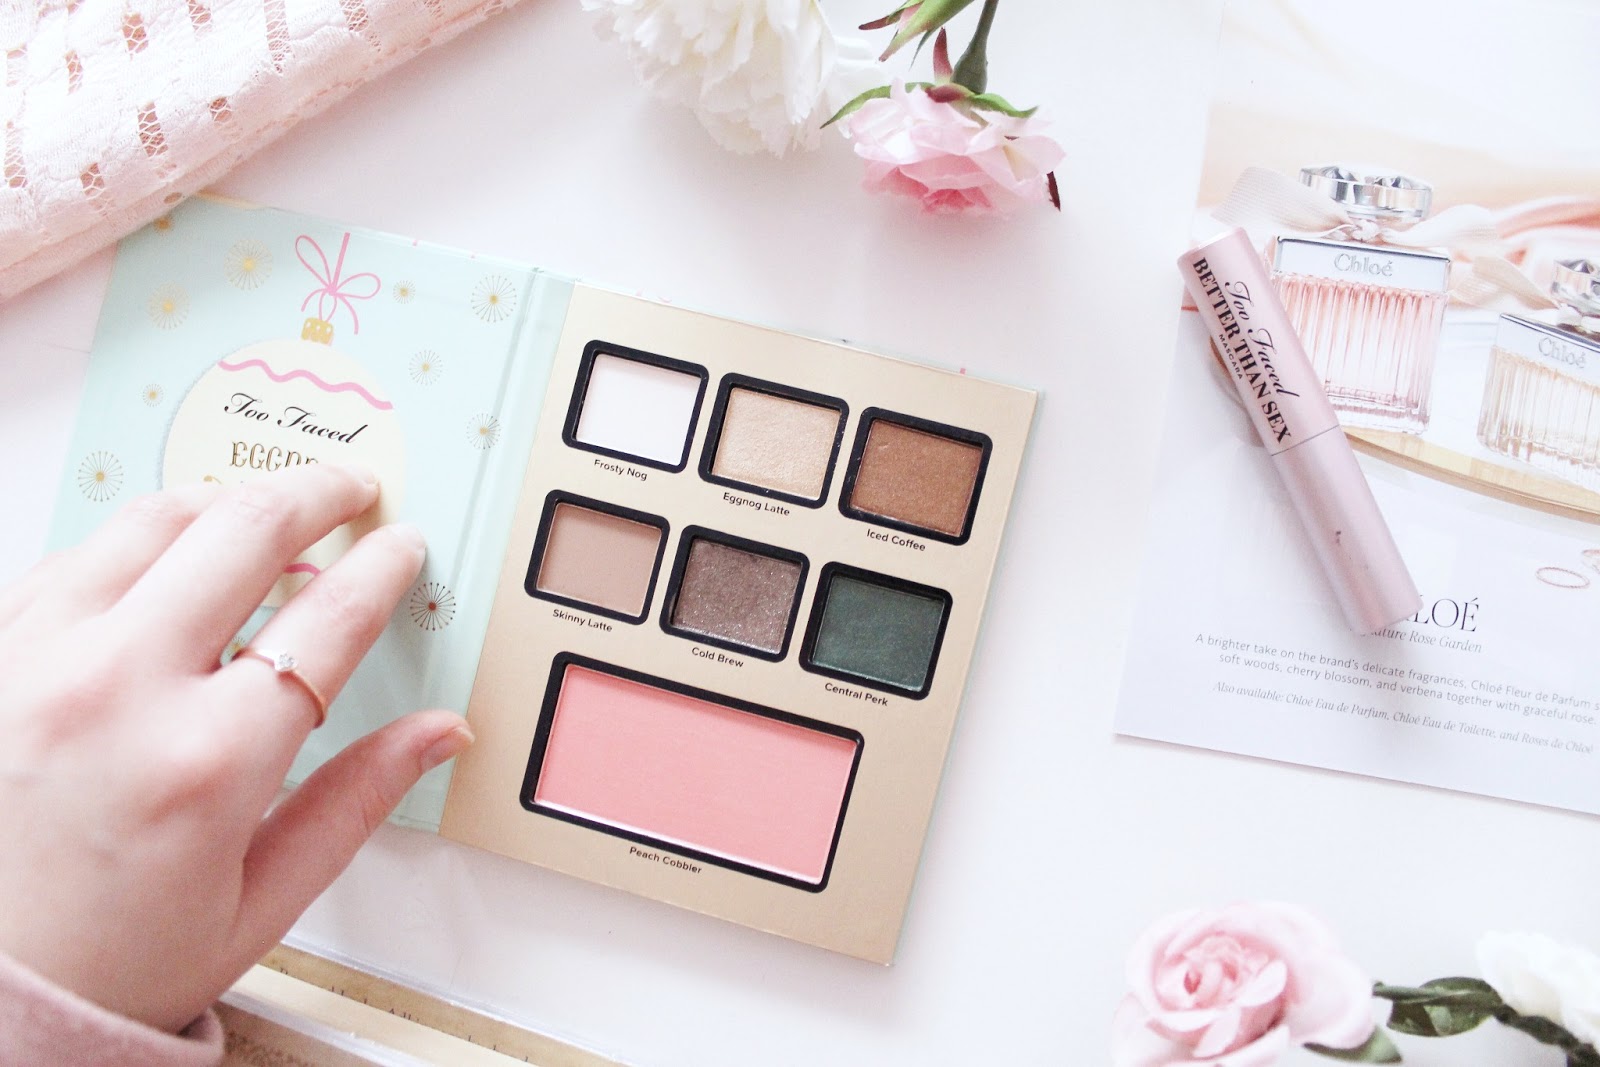 Too Faced Grande Hotel Cafe swatches and palettes review